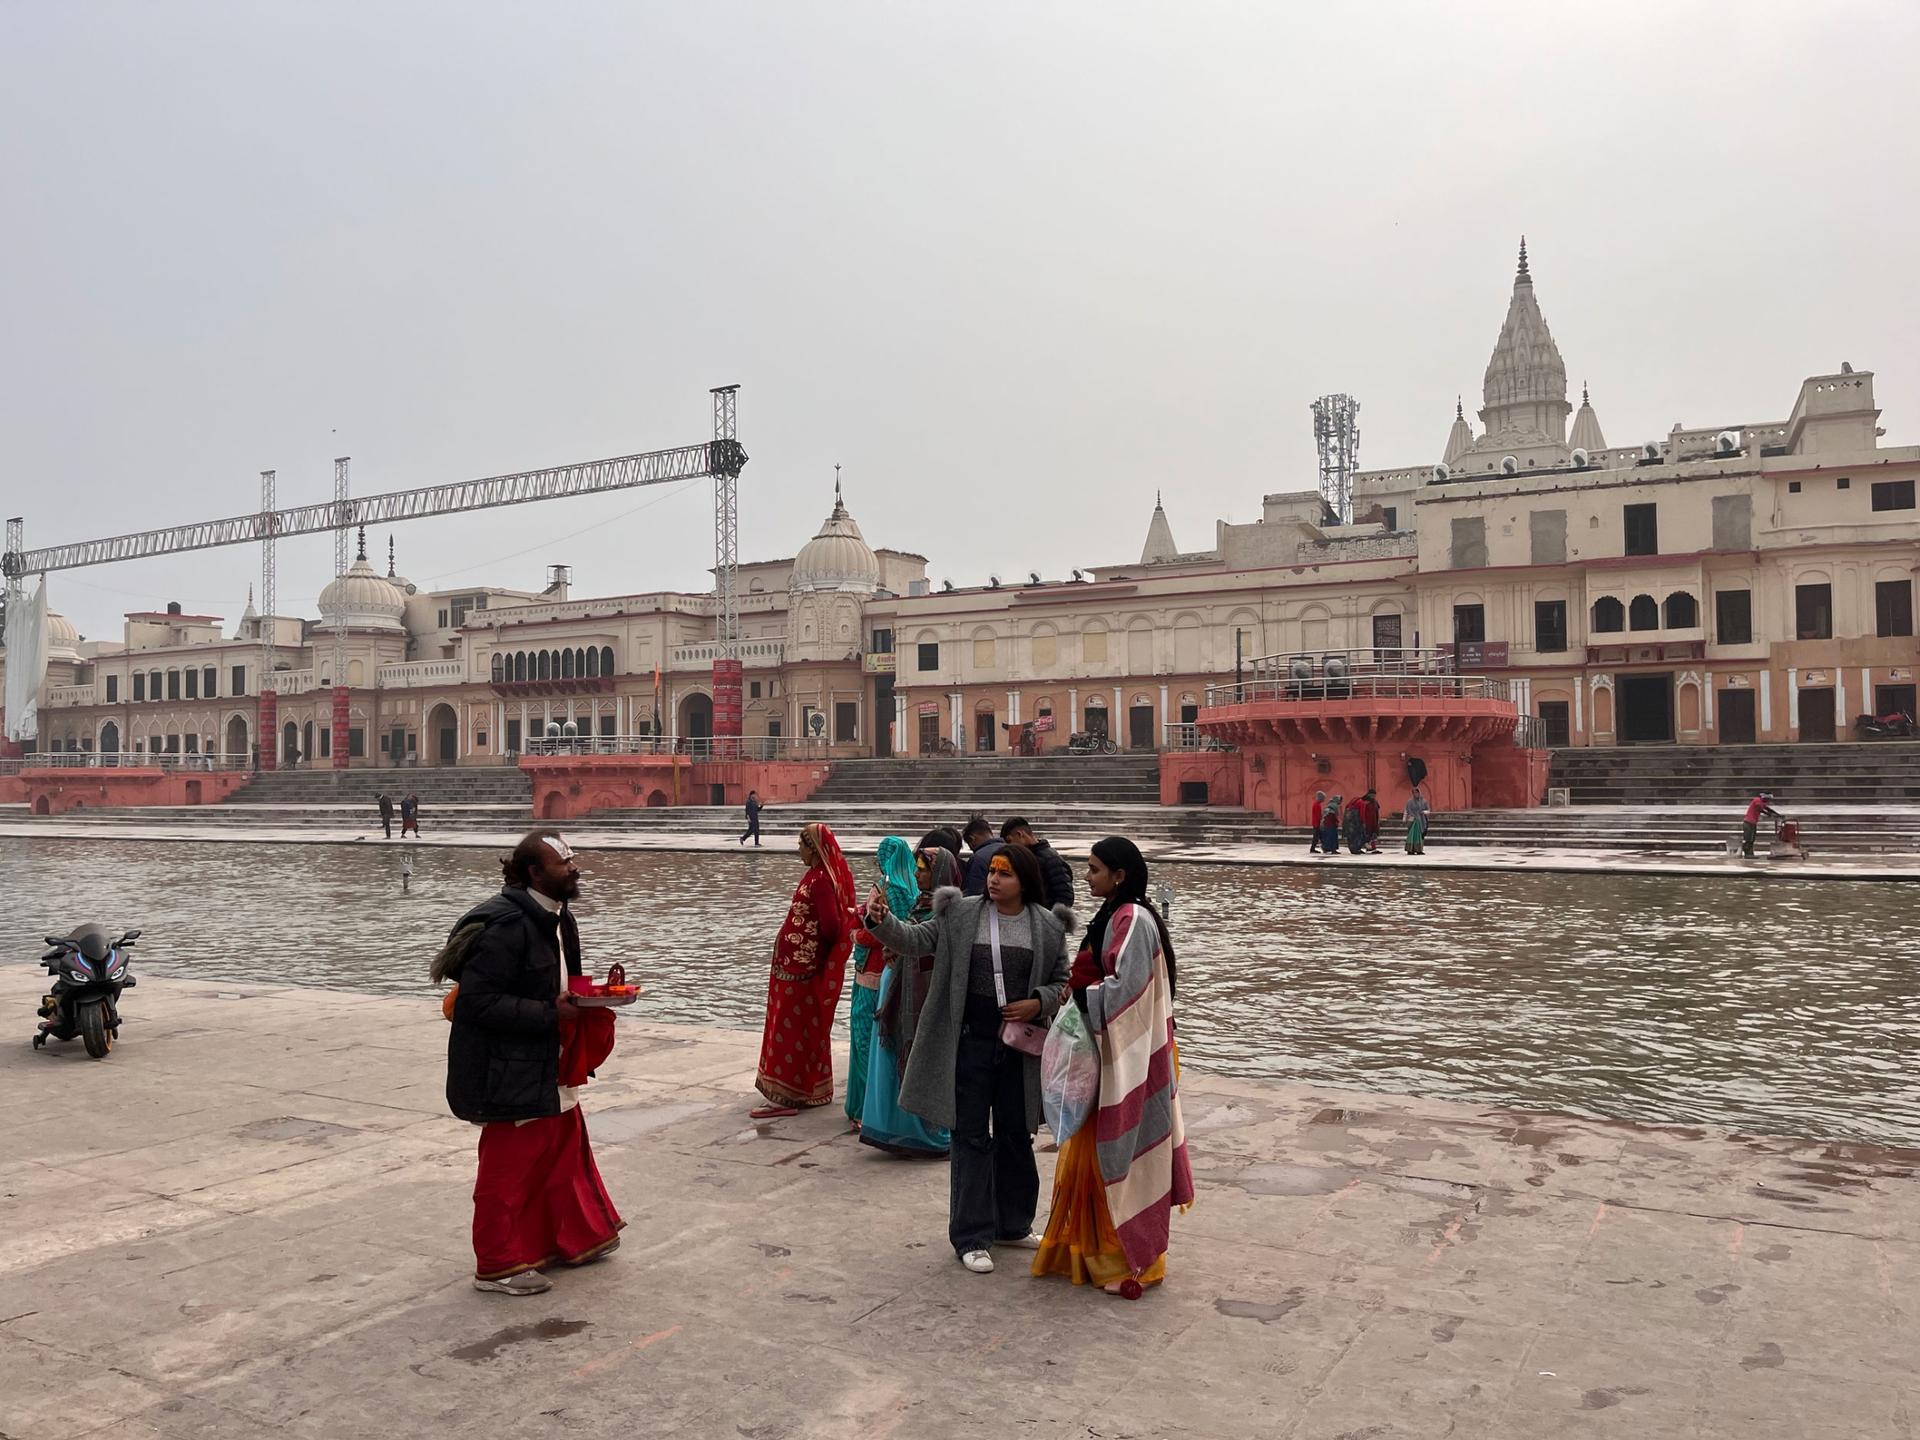  Tourists take selfies on the banks of the Saryu river in Ayodhya as Hindu pilgrims take a holy dip.